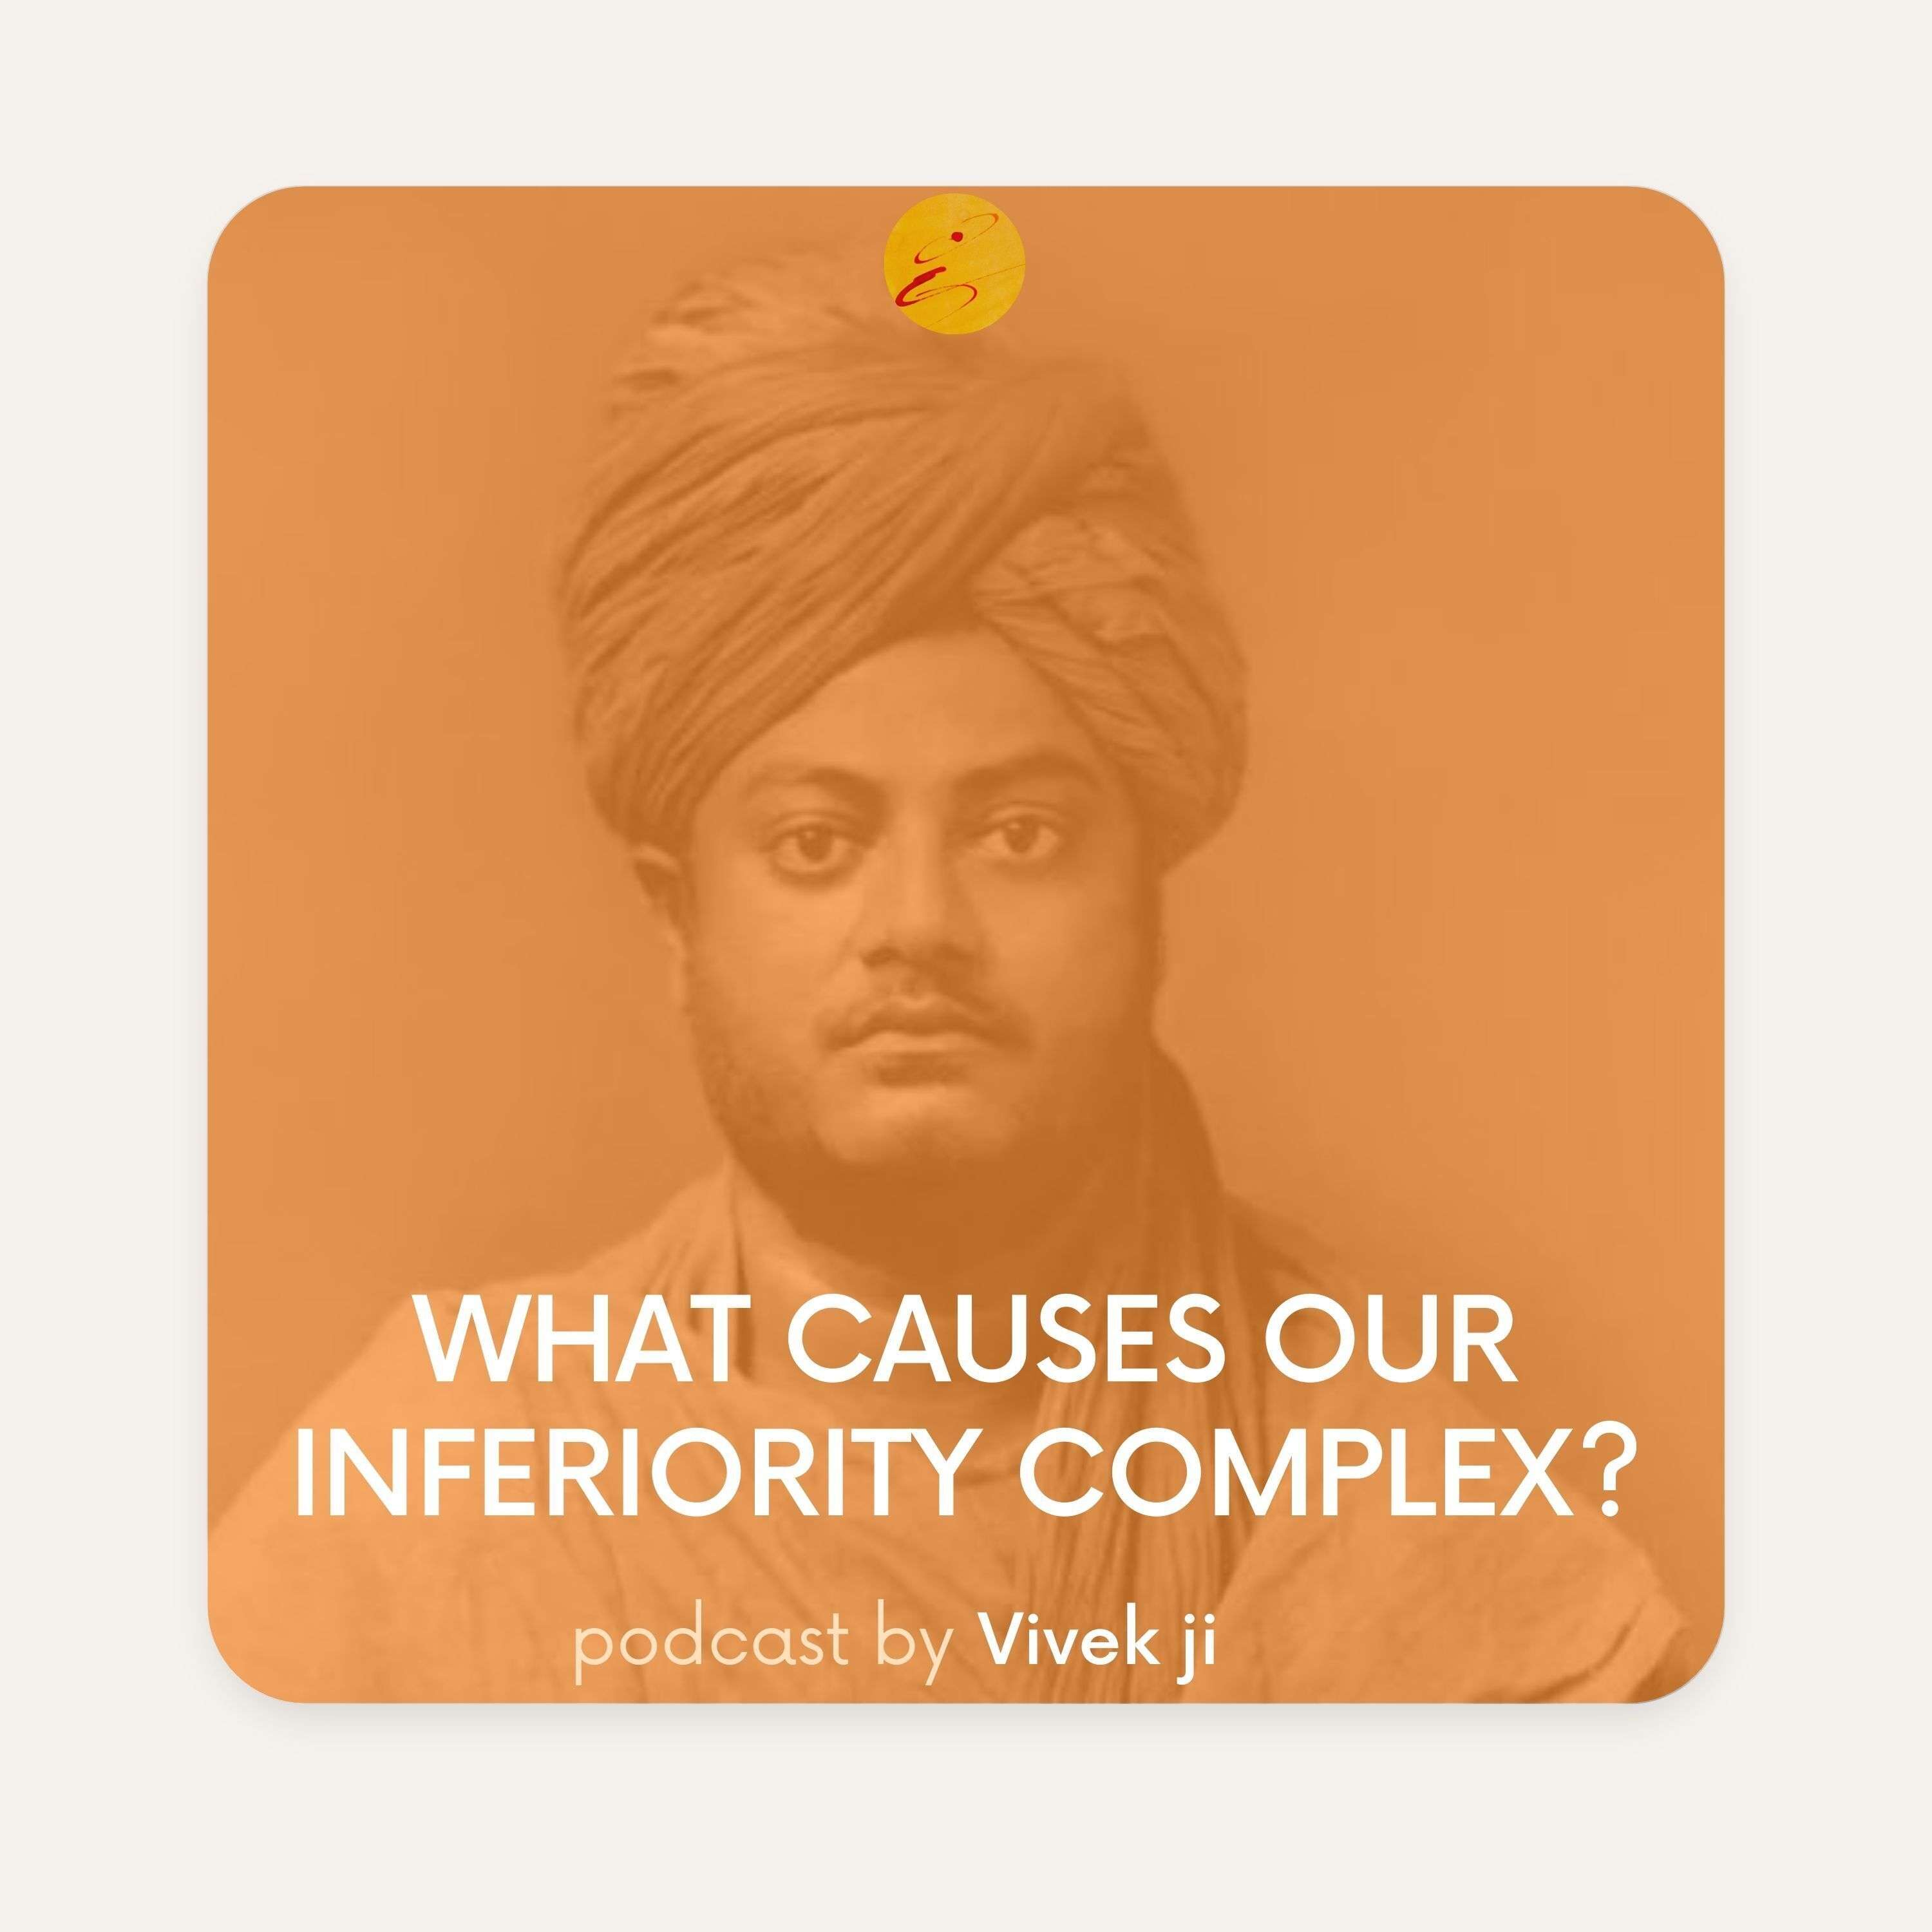 What causes our inferiority complex?